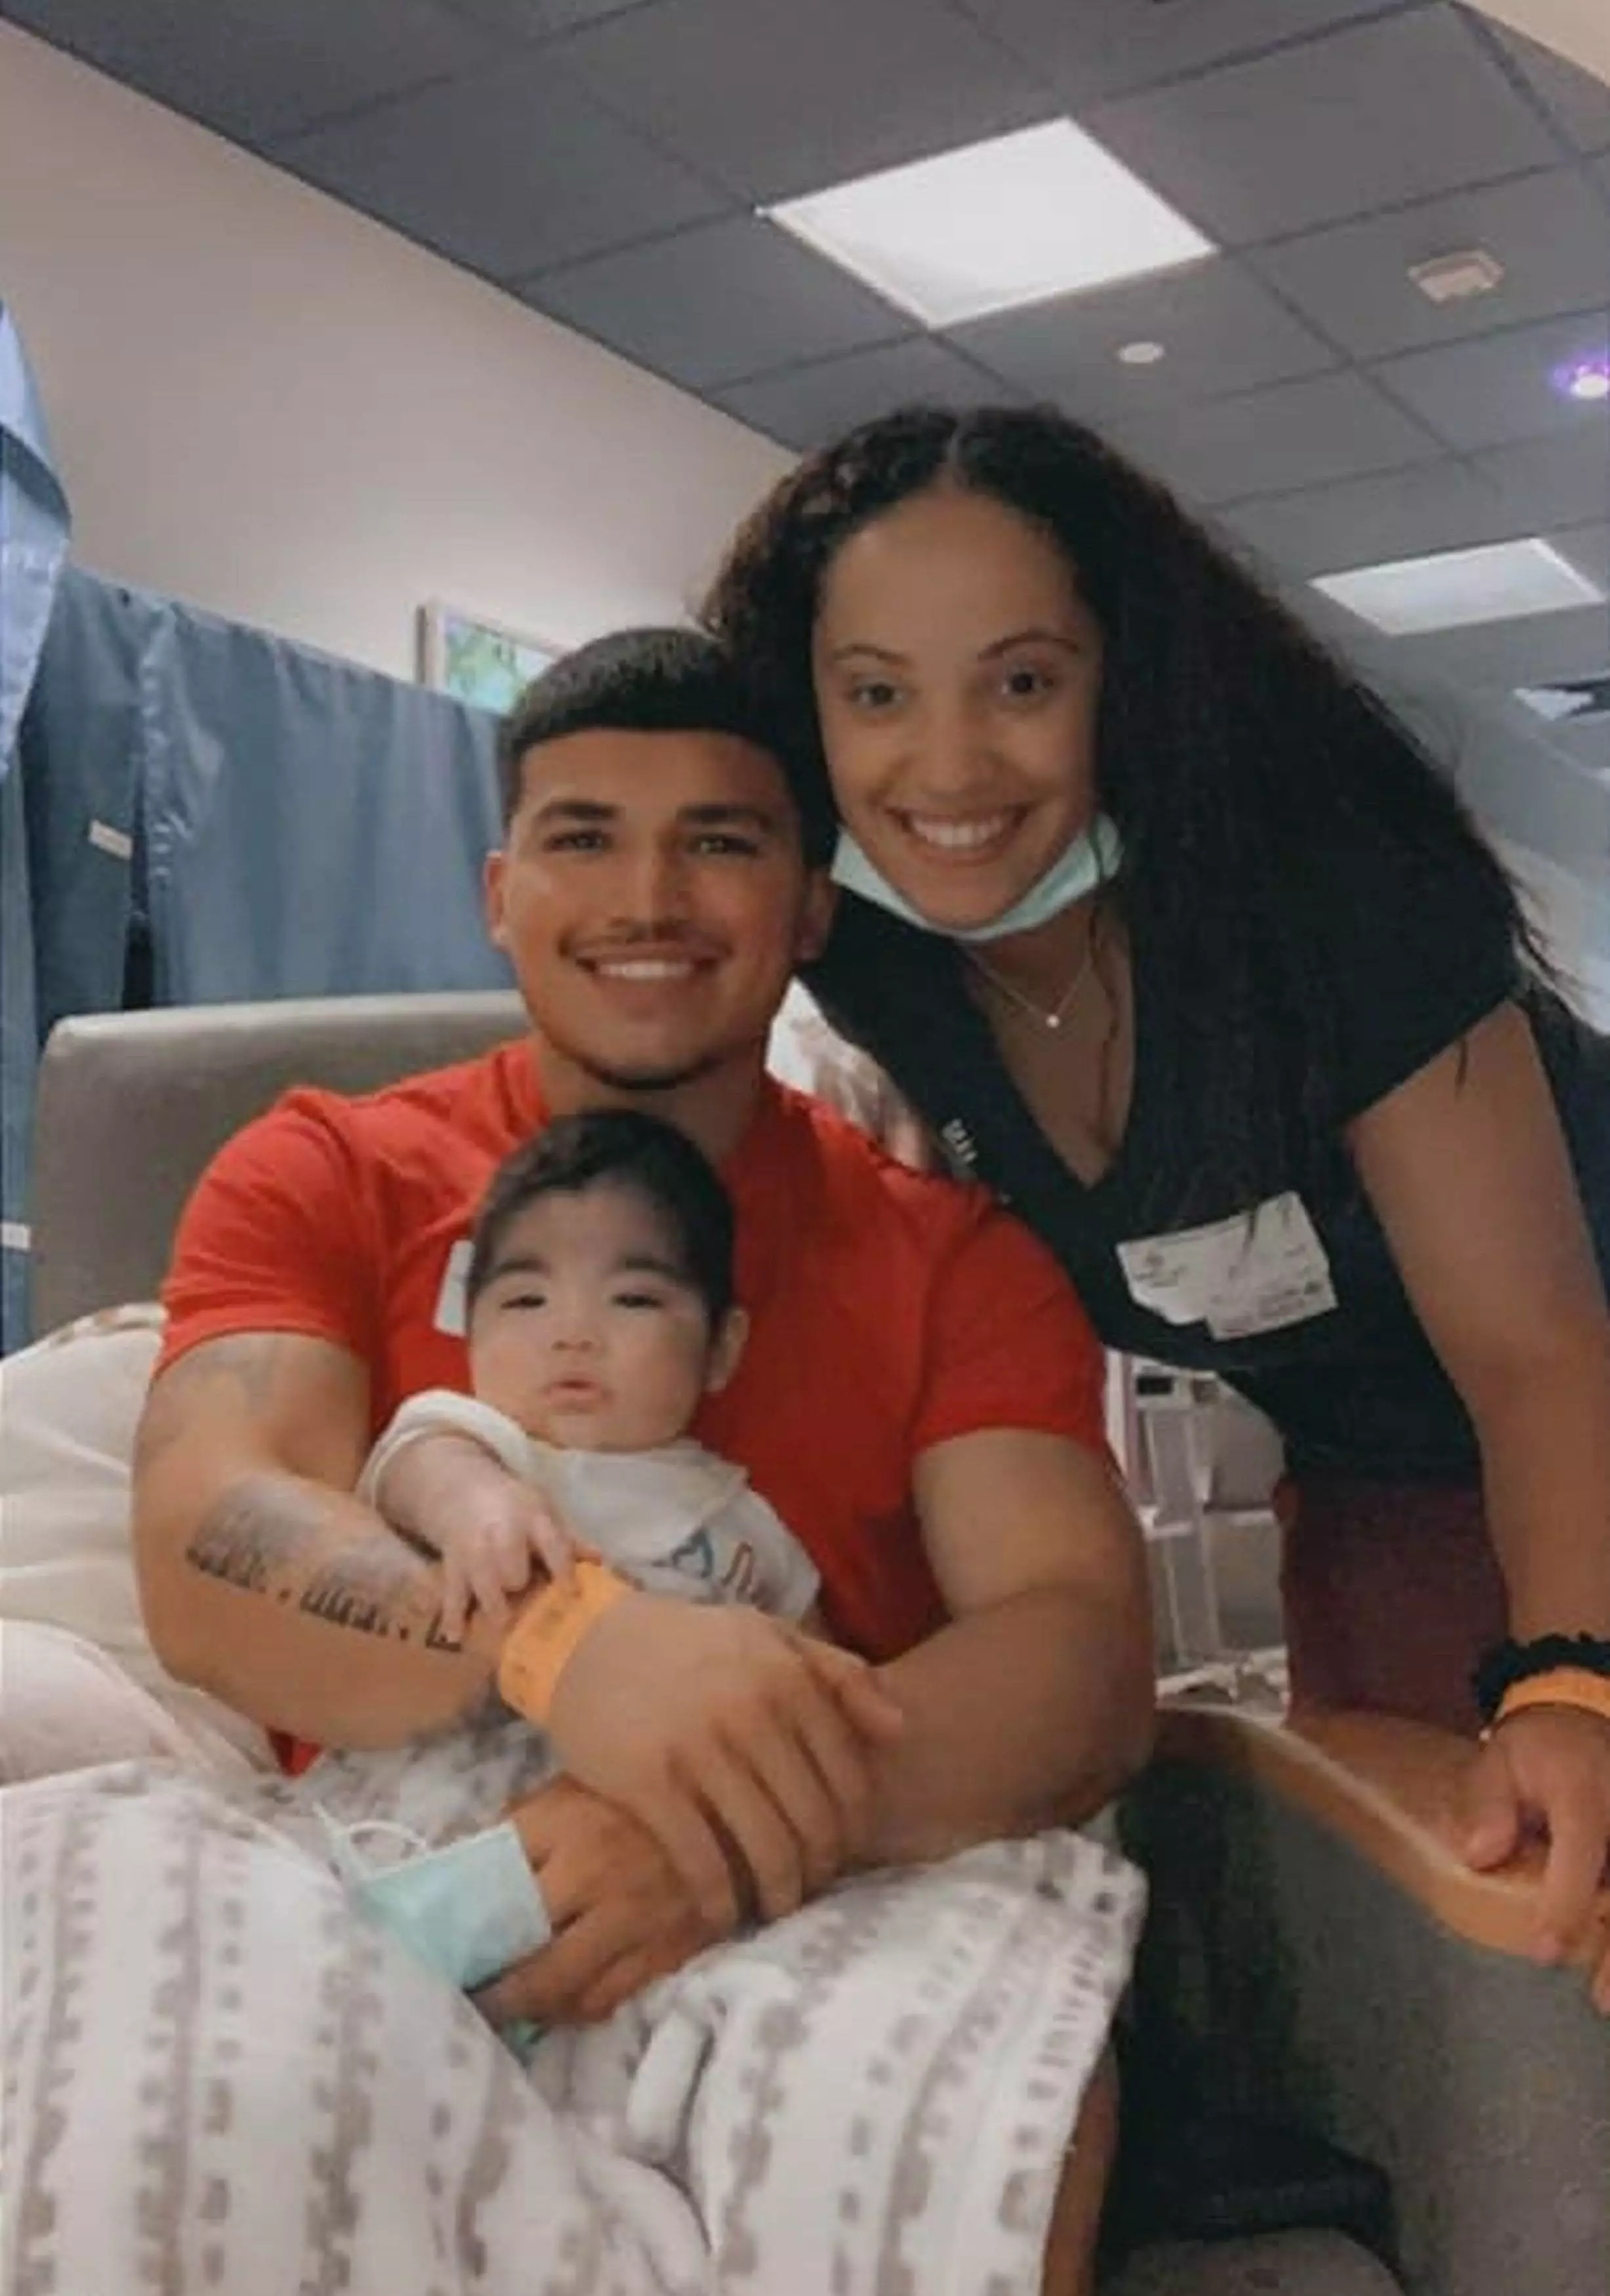 Parents Bri Shelby and Jared Hernandez had to put their baby on medication to control his rare condition (